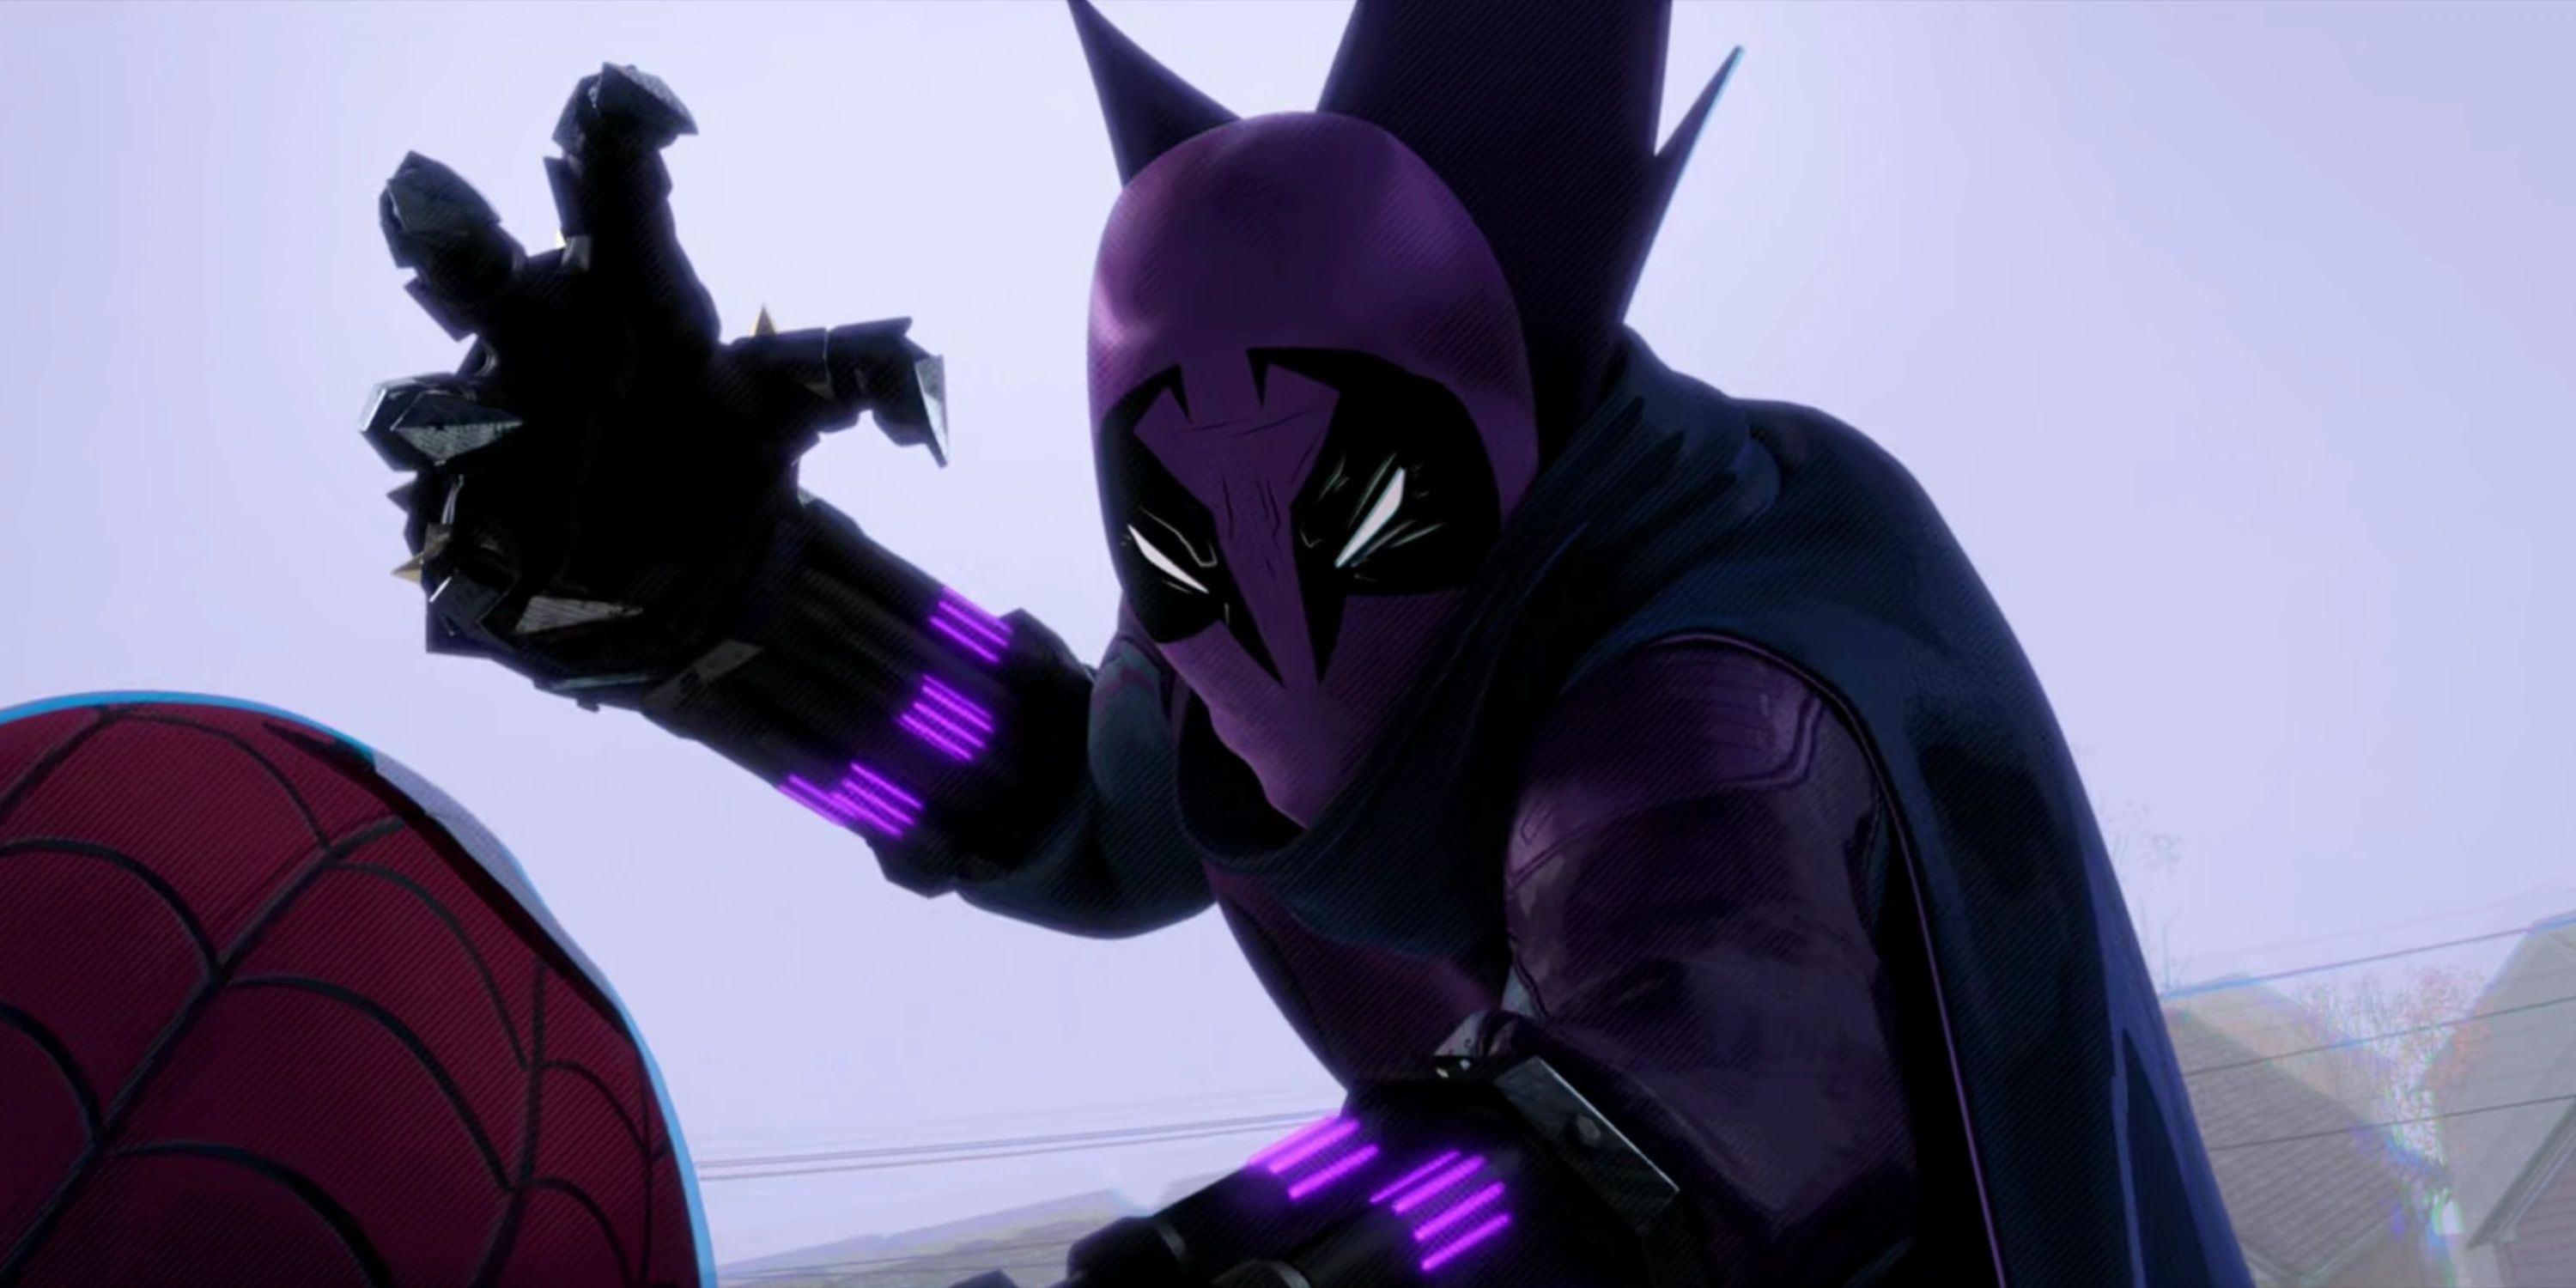 the prowler ready to attack miles morales spider-man